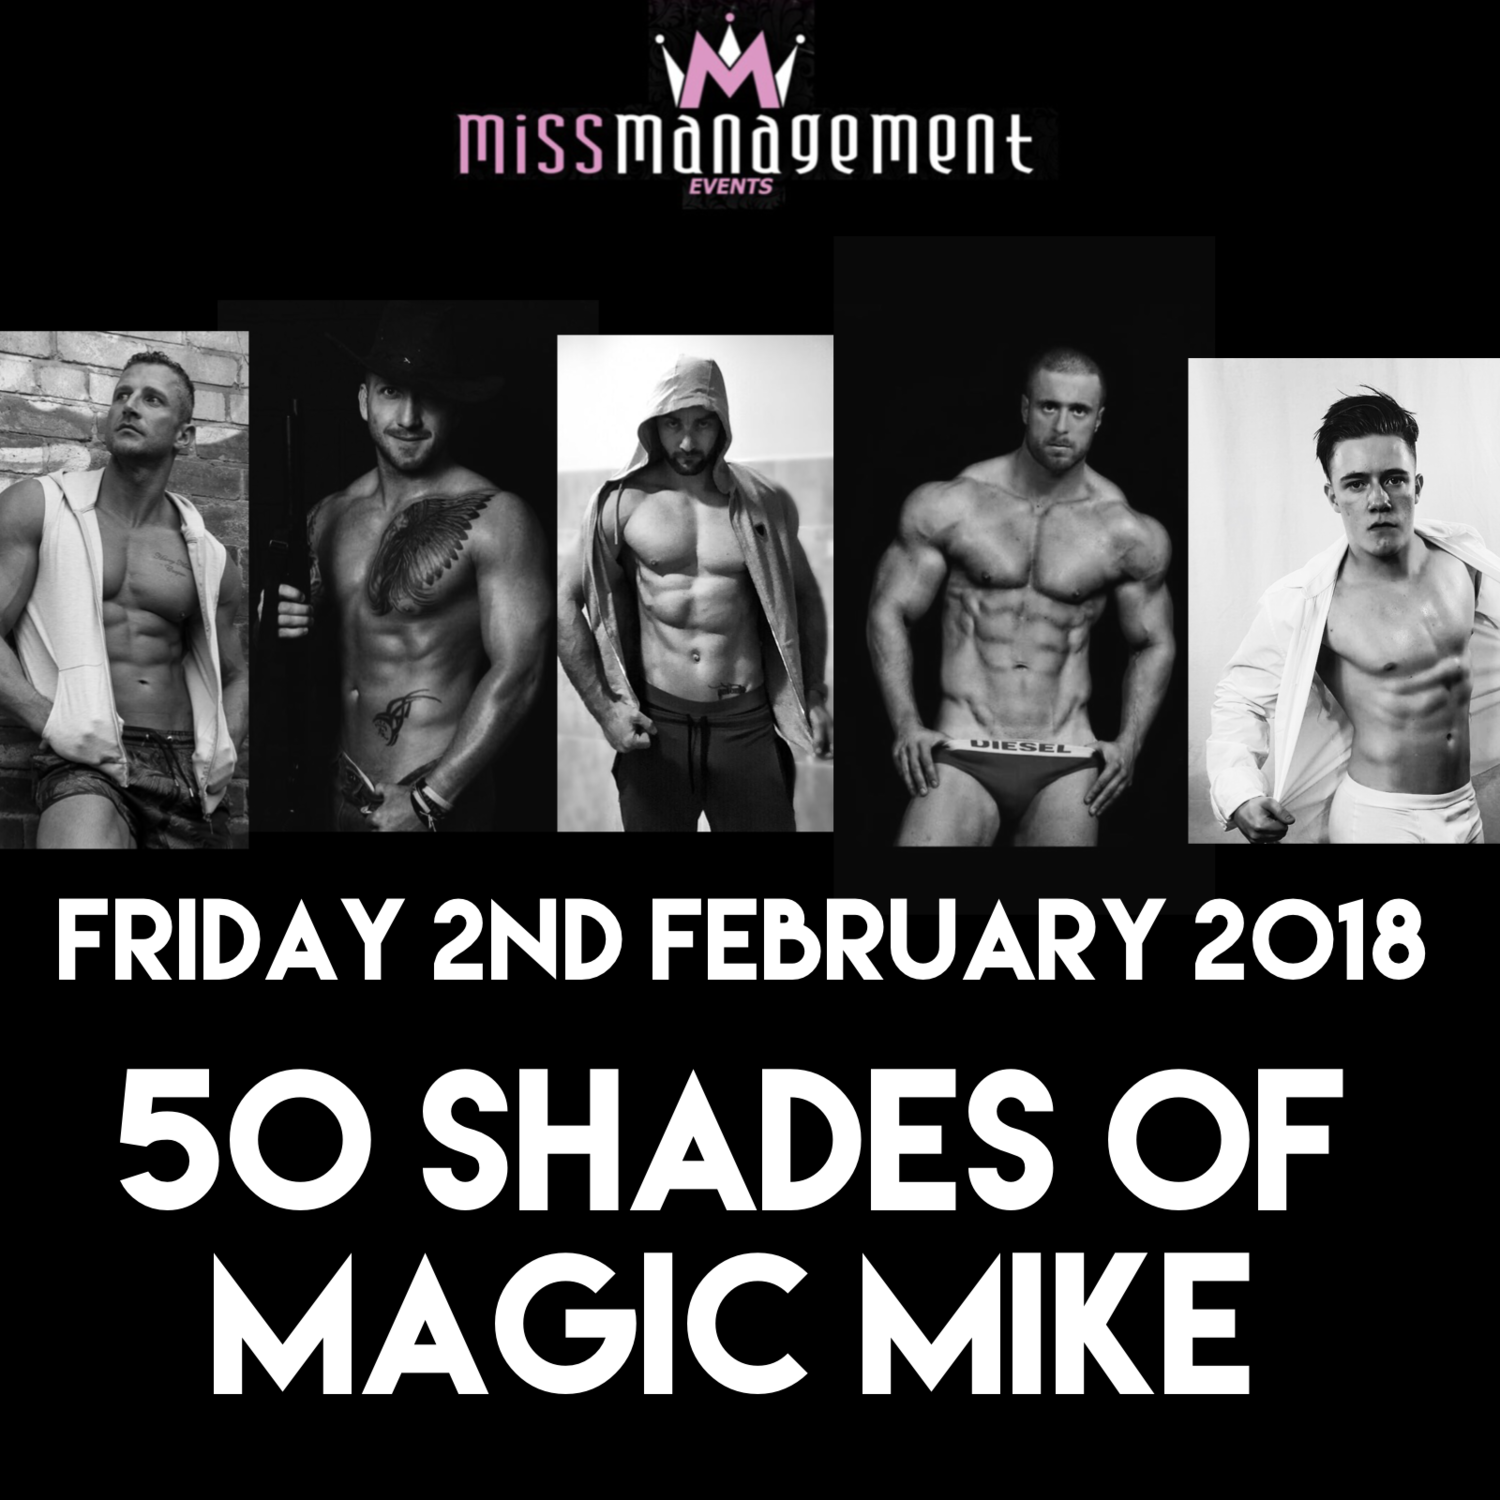 (MM20) ‘50 Shades of Magic Mike’ Rows 16-20